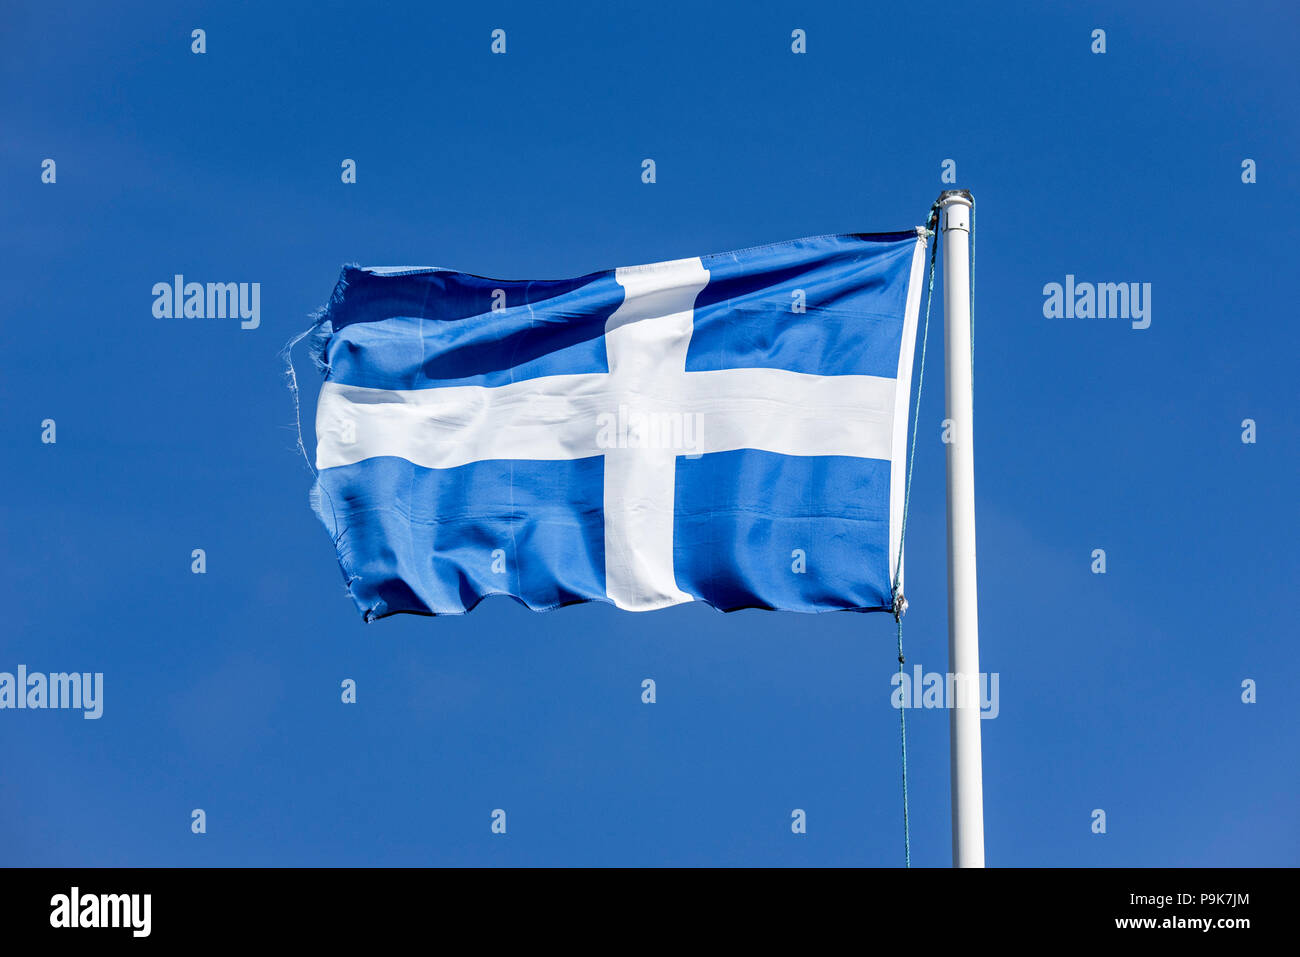 Worn flag of Shetland, white Nordic cross on a blue background, blowing in  the wind against blue sky, Shetland Islands, Scotland, UK Stock Photo -  Alamy